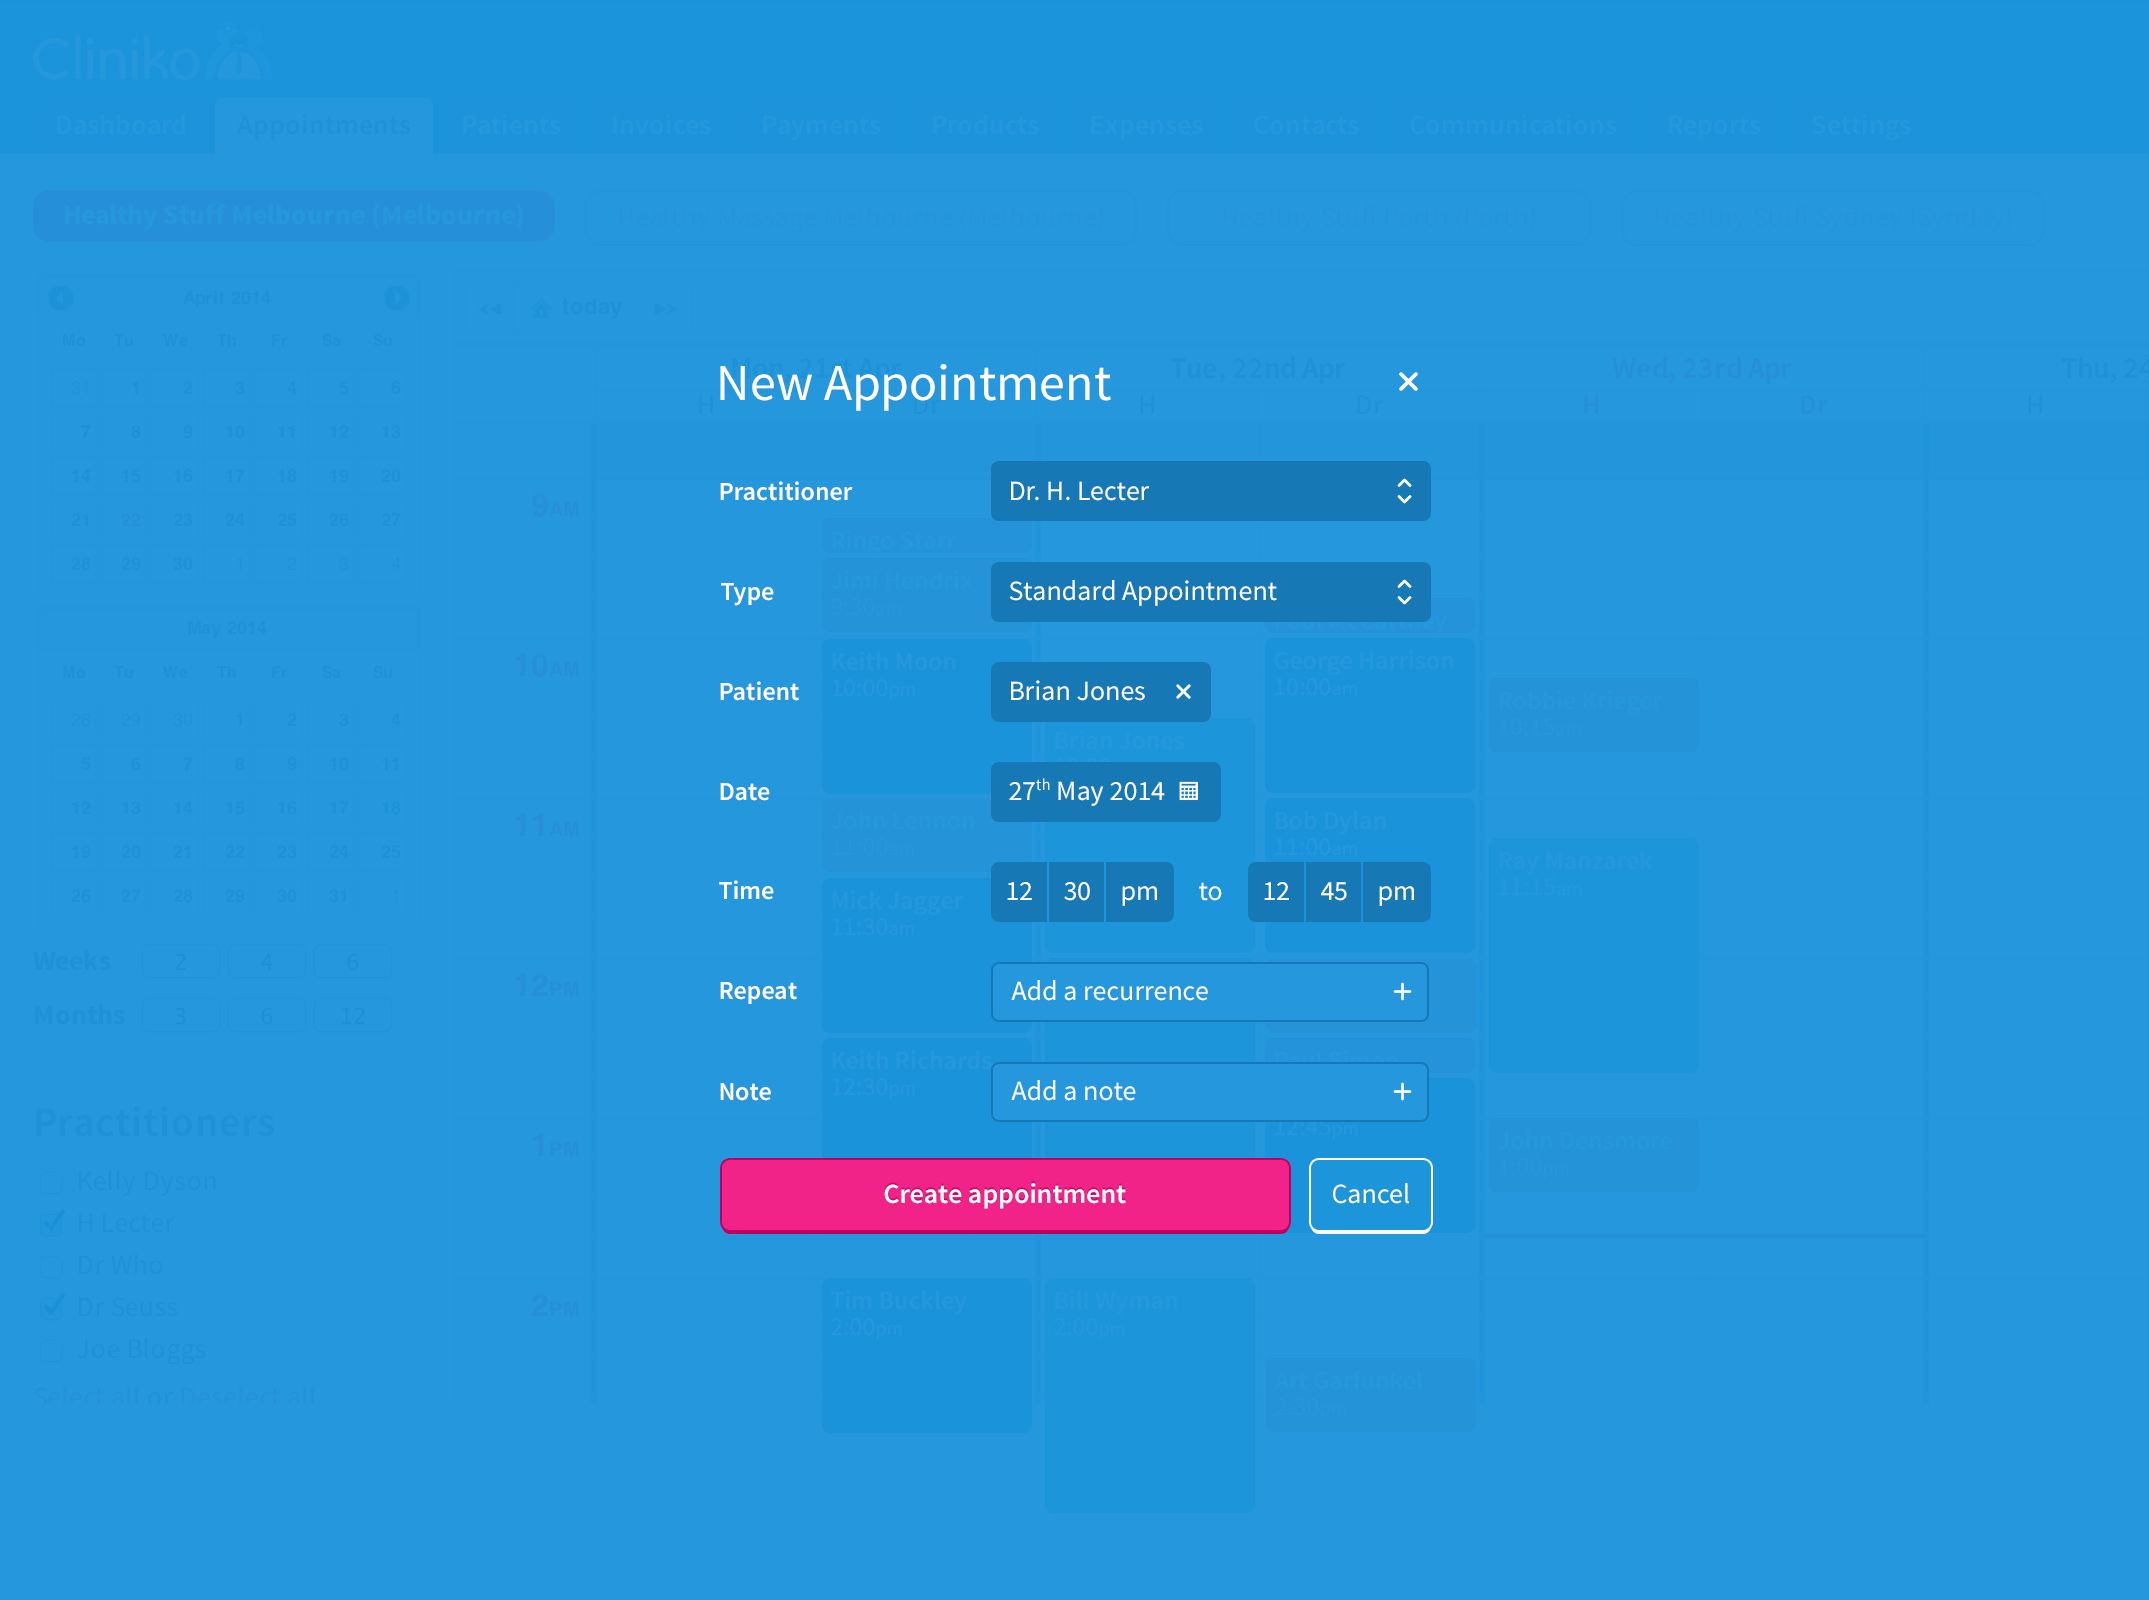 New appointment in a blue modal.